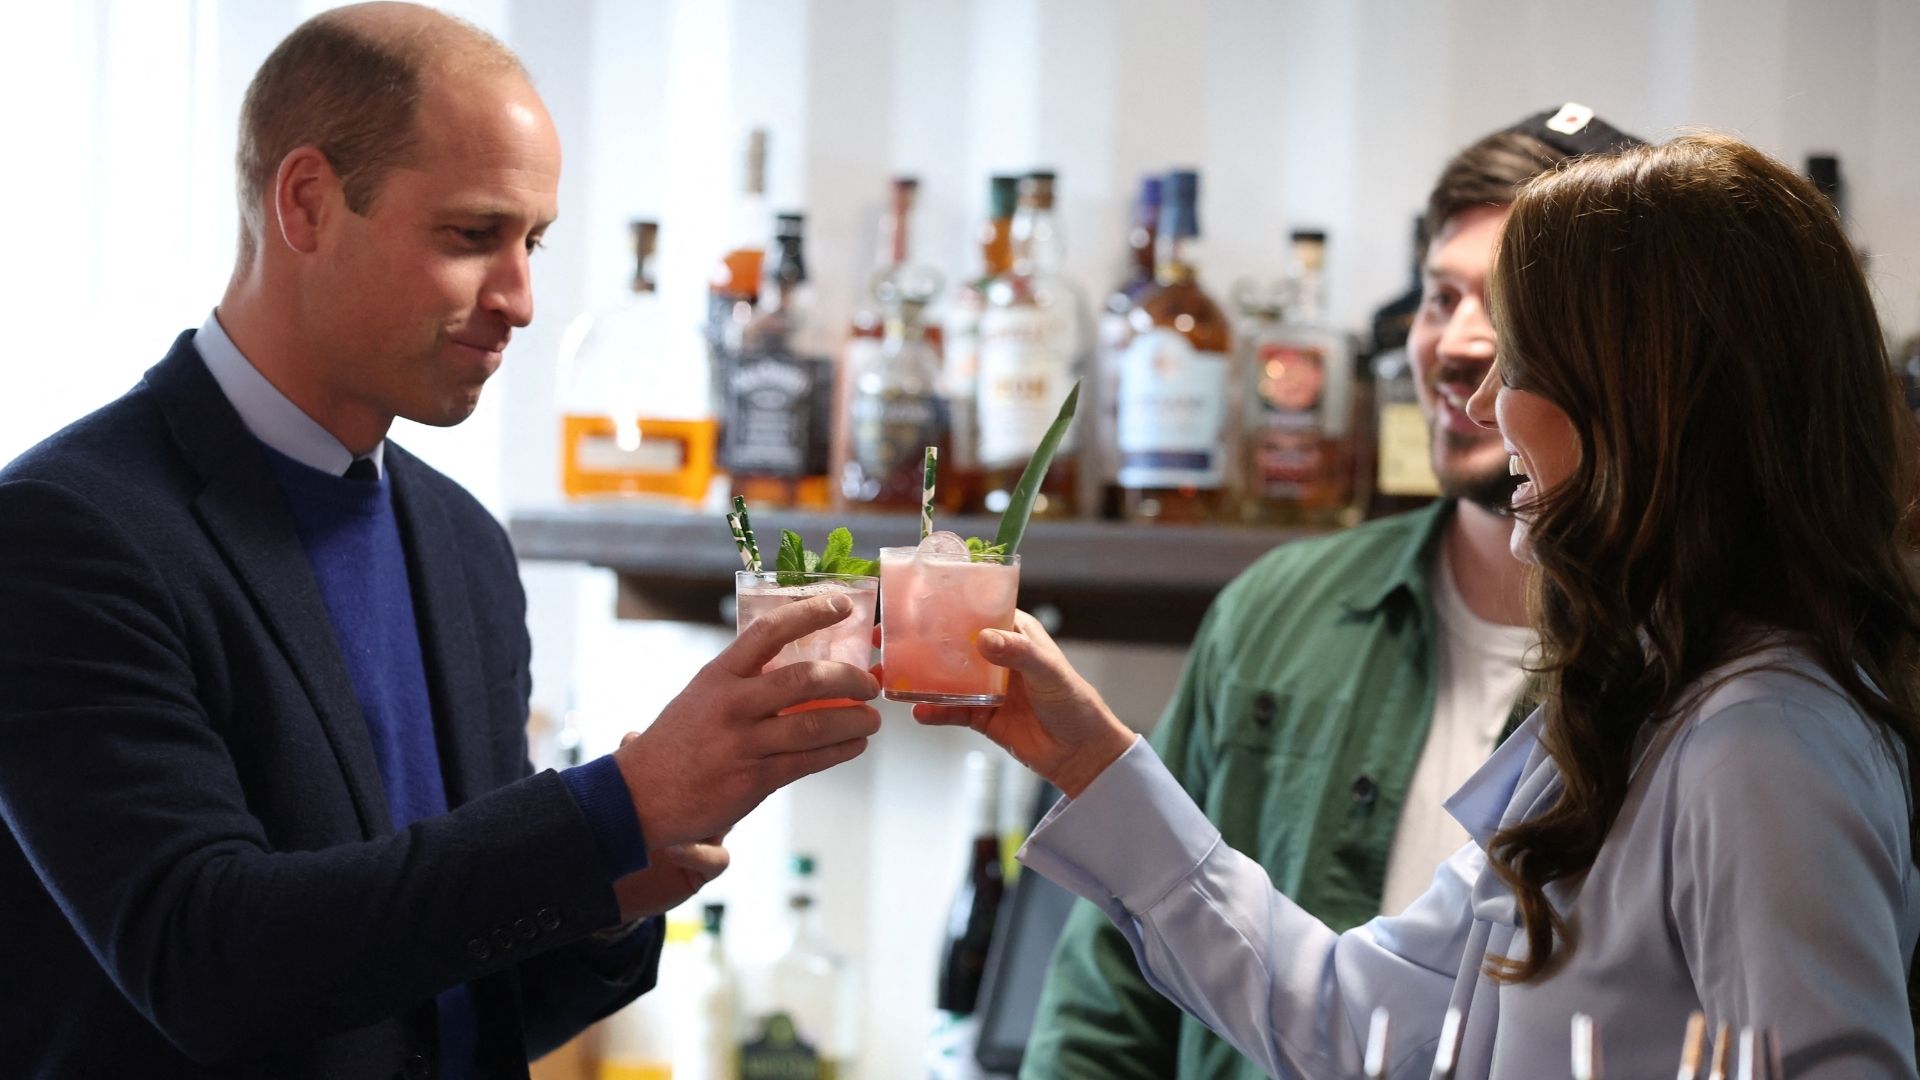 Prince William and Kate Middleton cocktails